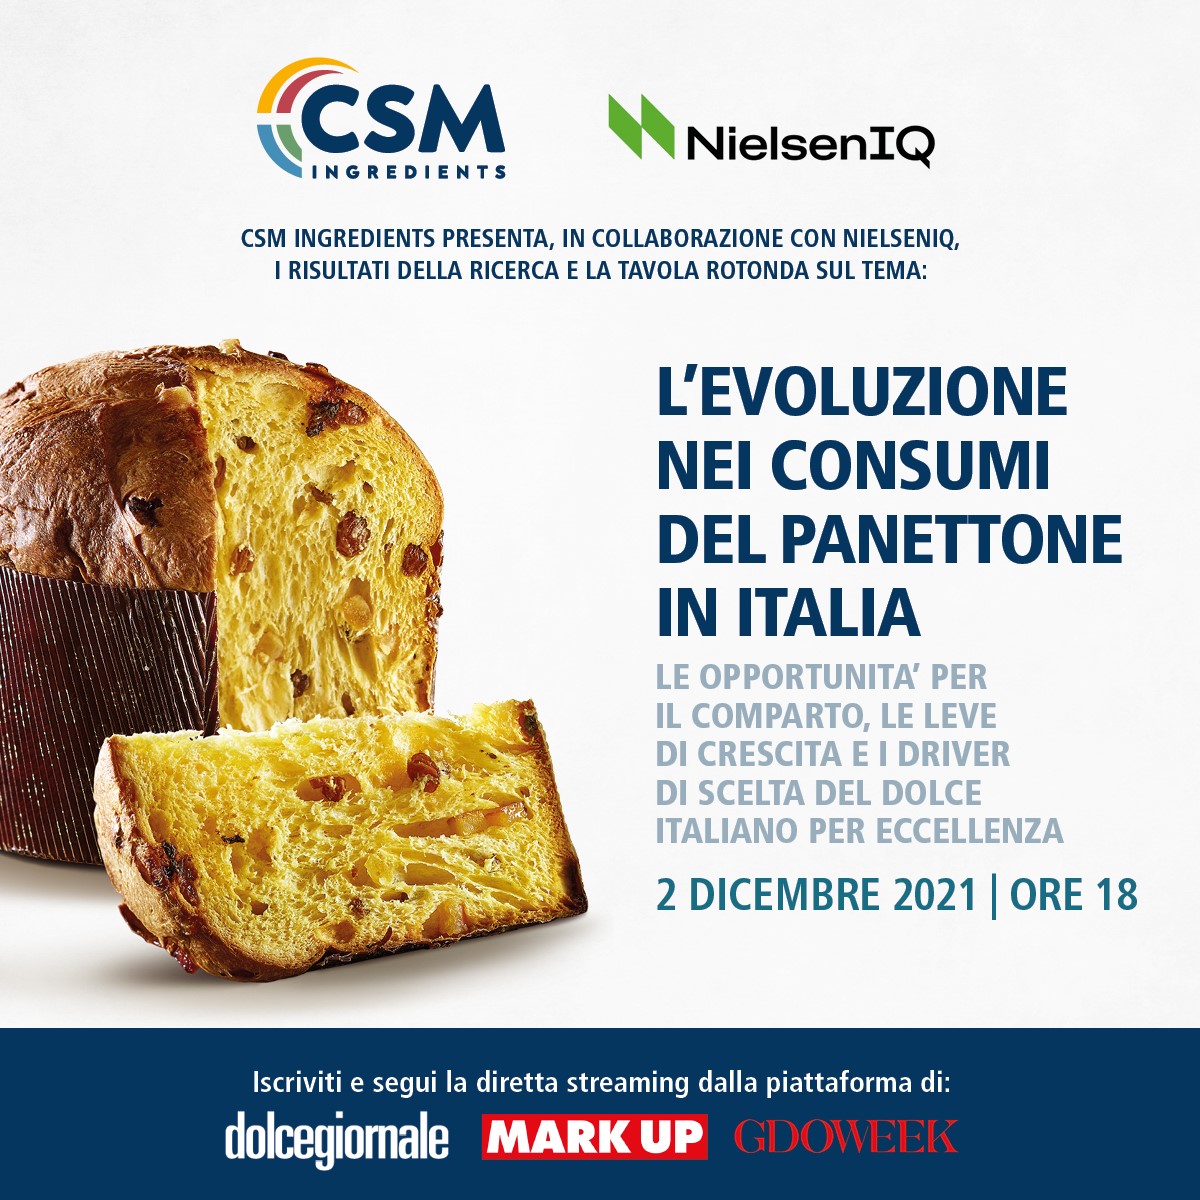 Since 2019 our Italian team has worked with @NielsenIQ drafting the first report on the artisanal Panettone market. Panettone market data 2021 will be presented at Eataly in Milan the 2nd of Dec. This event will also be live streamed in Italian at: lnkd.in/dbaq48-g